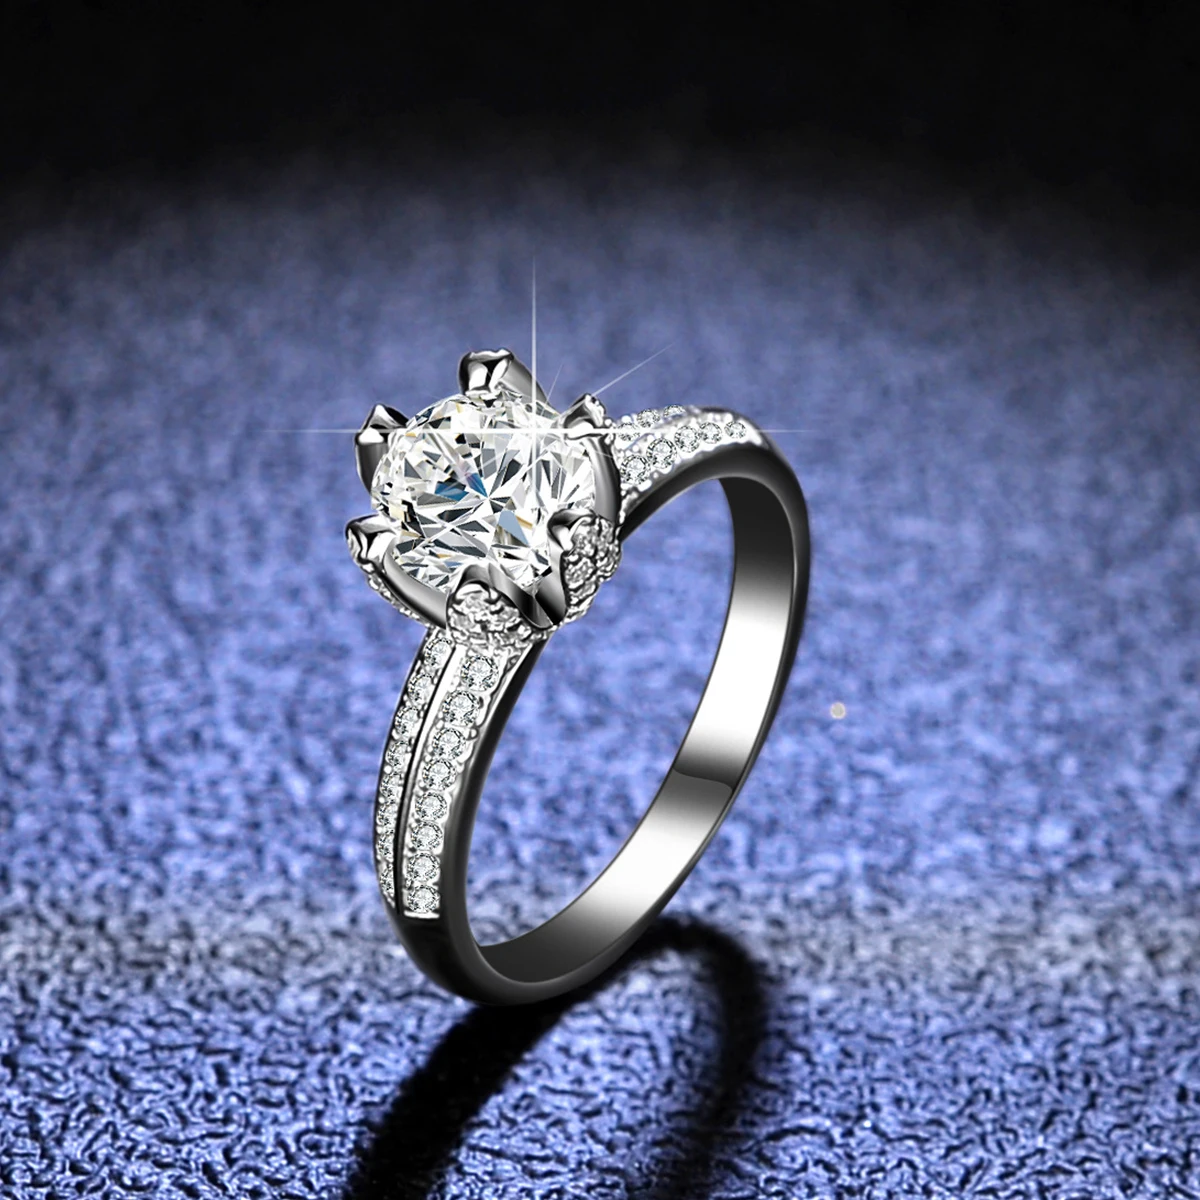 The best places to buy wedding rings online | BusinessInsider India